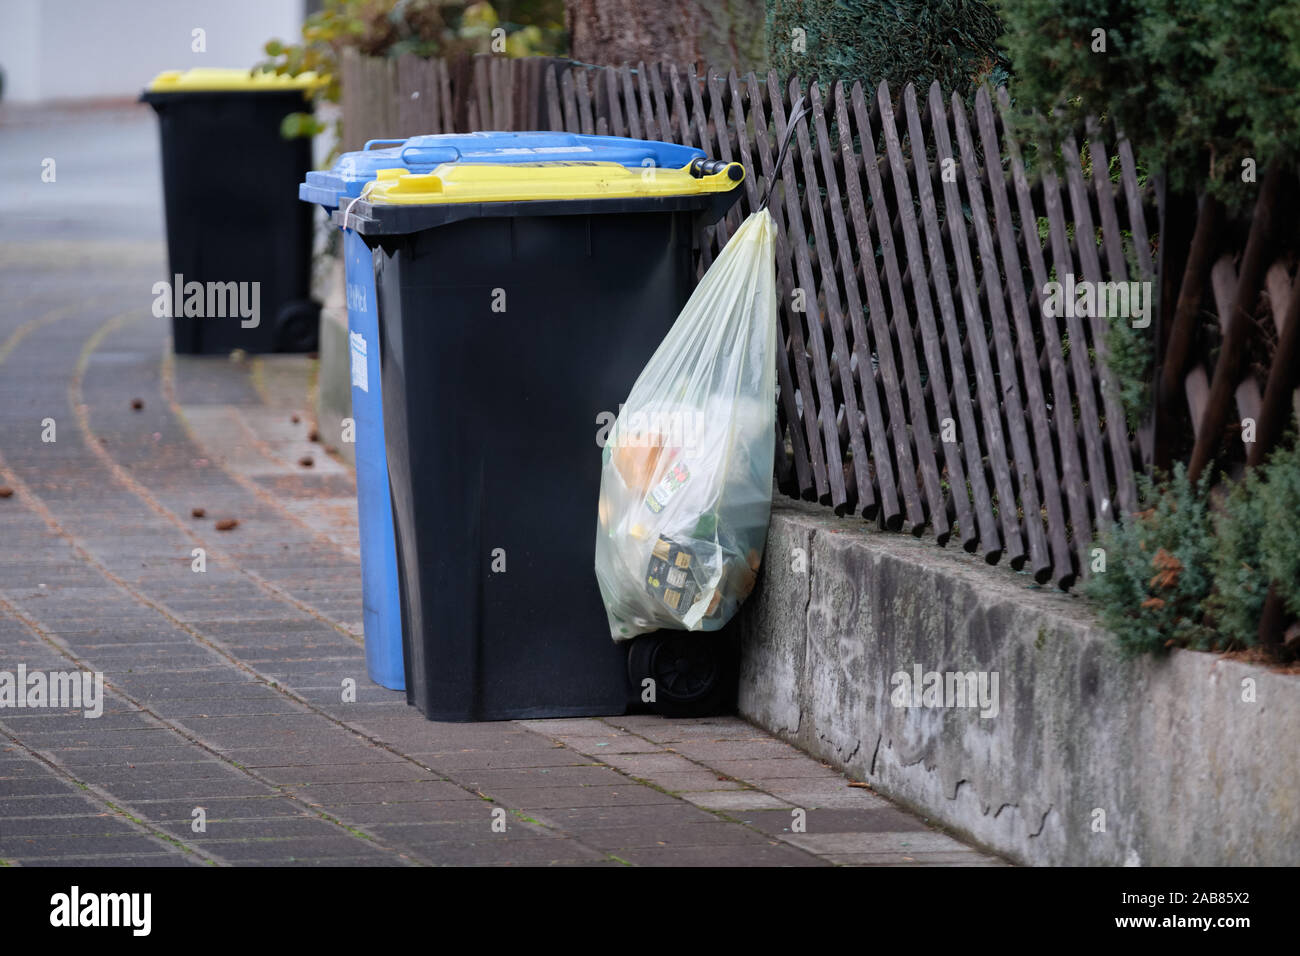 Nuremberg, Germany - November 25, 2019: A yellow bag called Gelber Sack is  hanging on a trellis-work fence with a Gelbe Tonne behind that wil replace  Stock Photo - Alamy